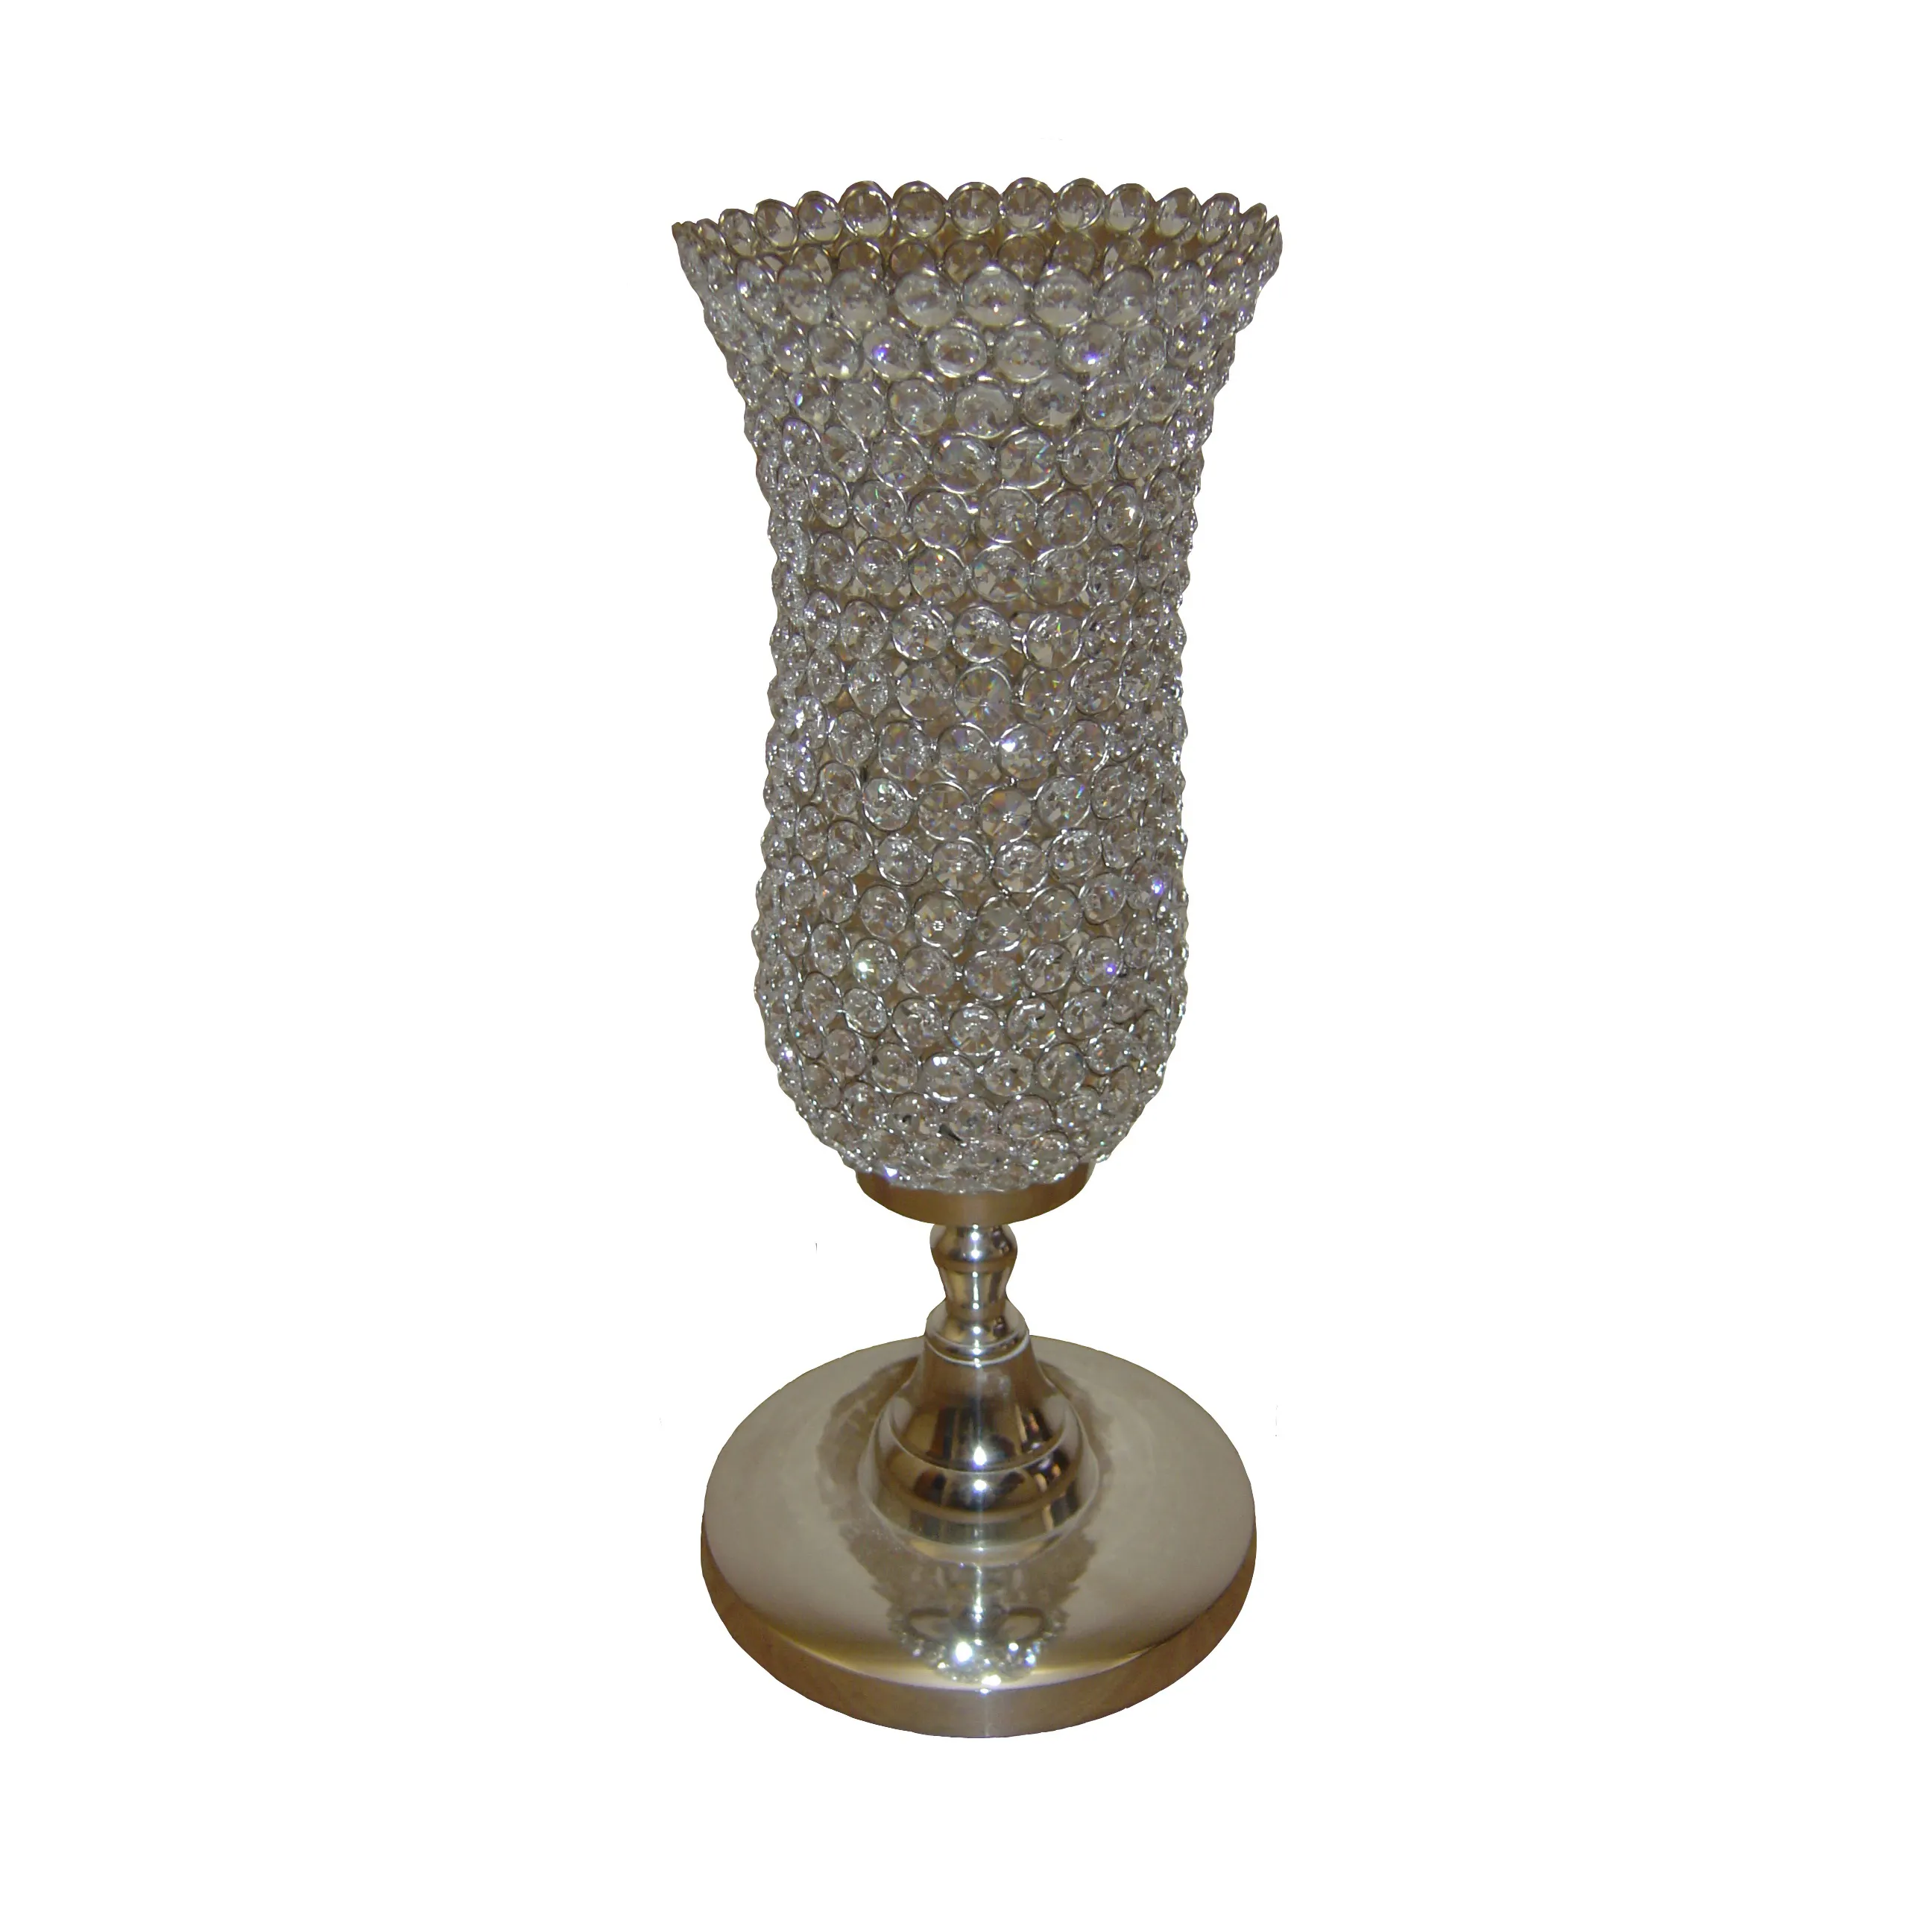 Home Decorative Antique Finishing 5 Arm Candle Stand For Hotel and Table Accessories Famous Candelabra At Lowest Price